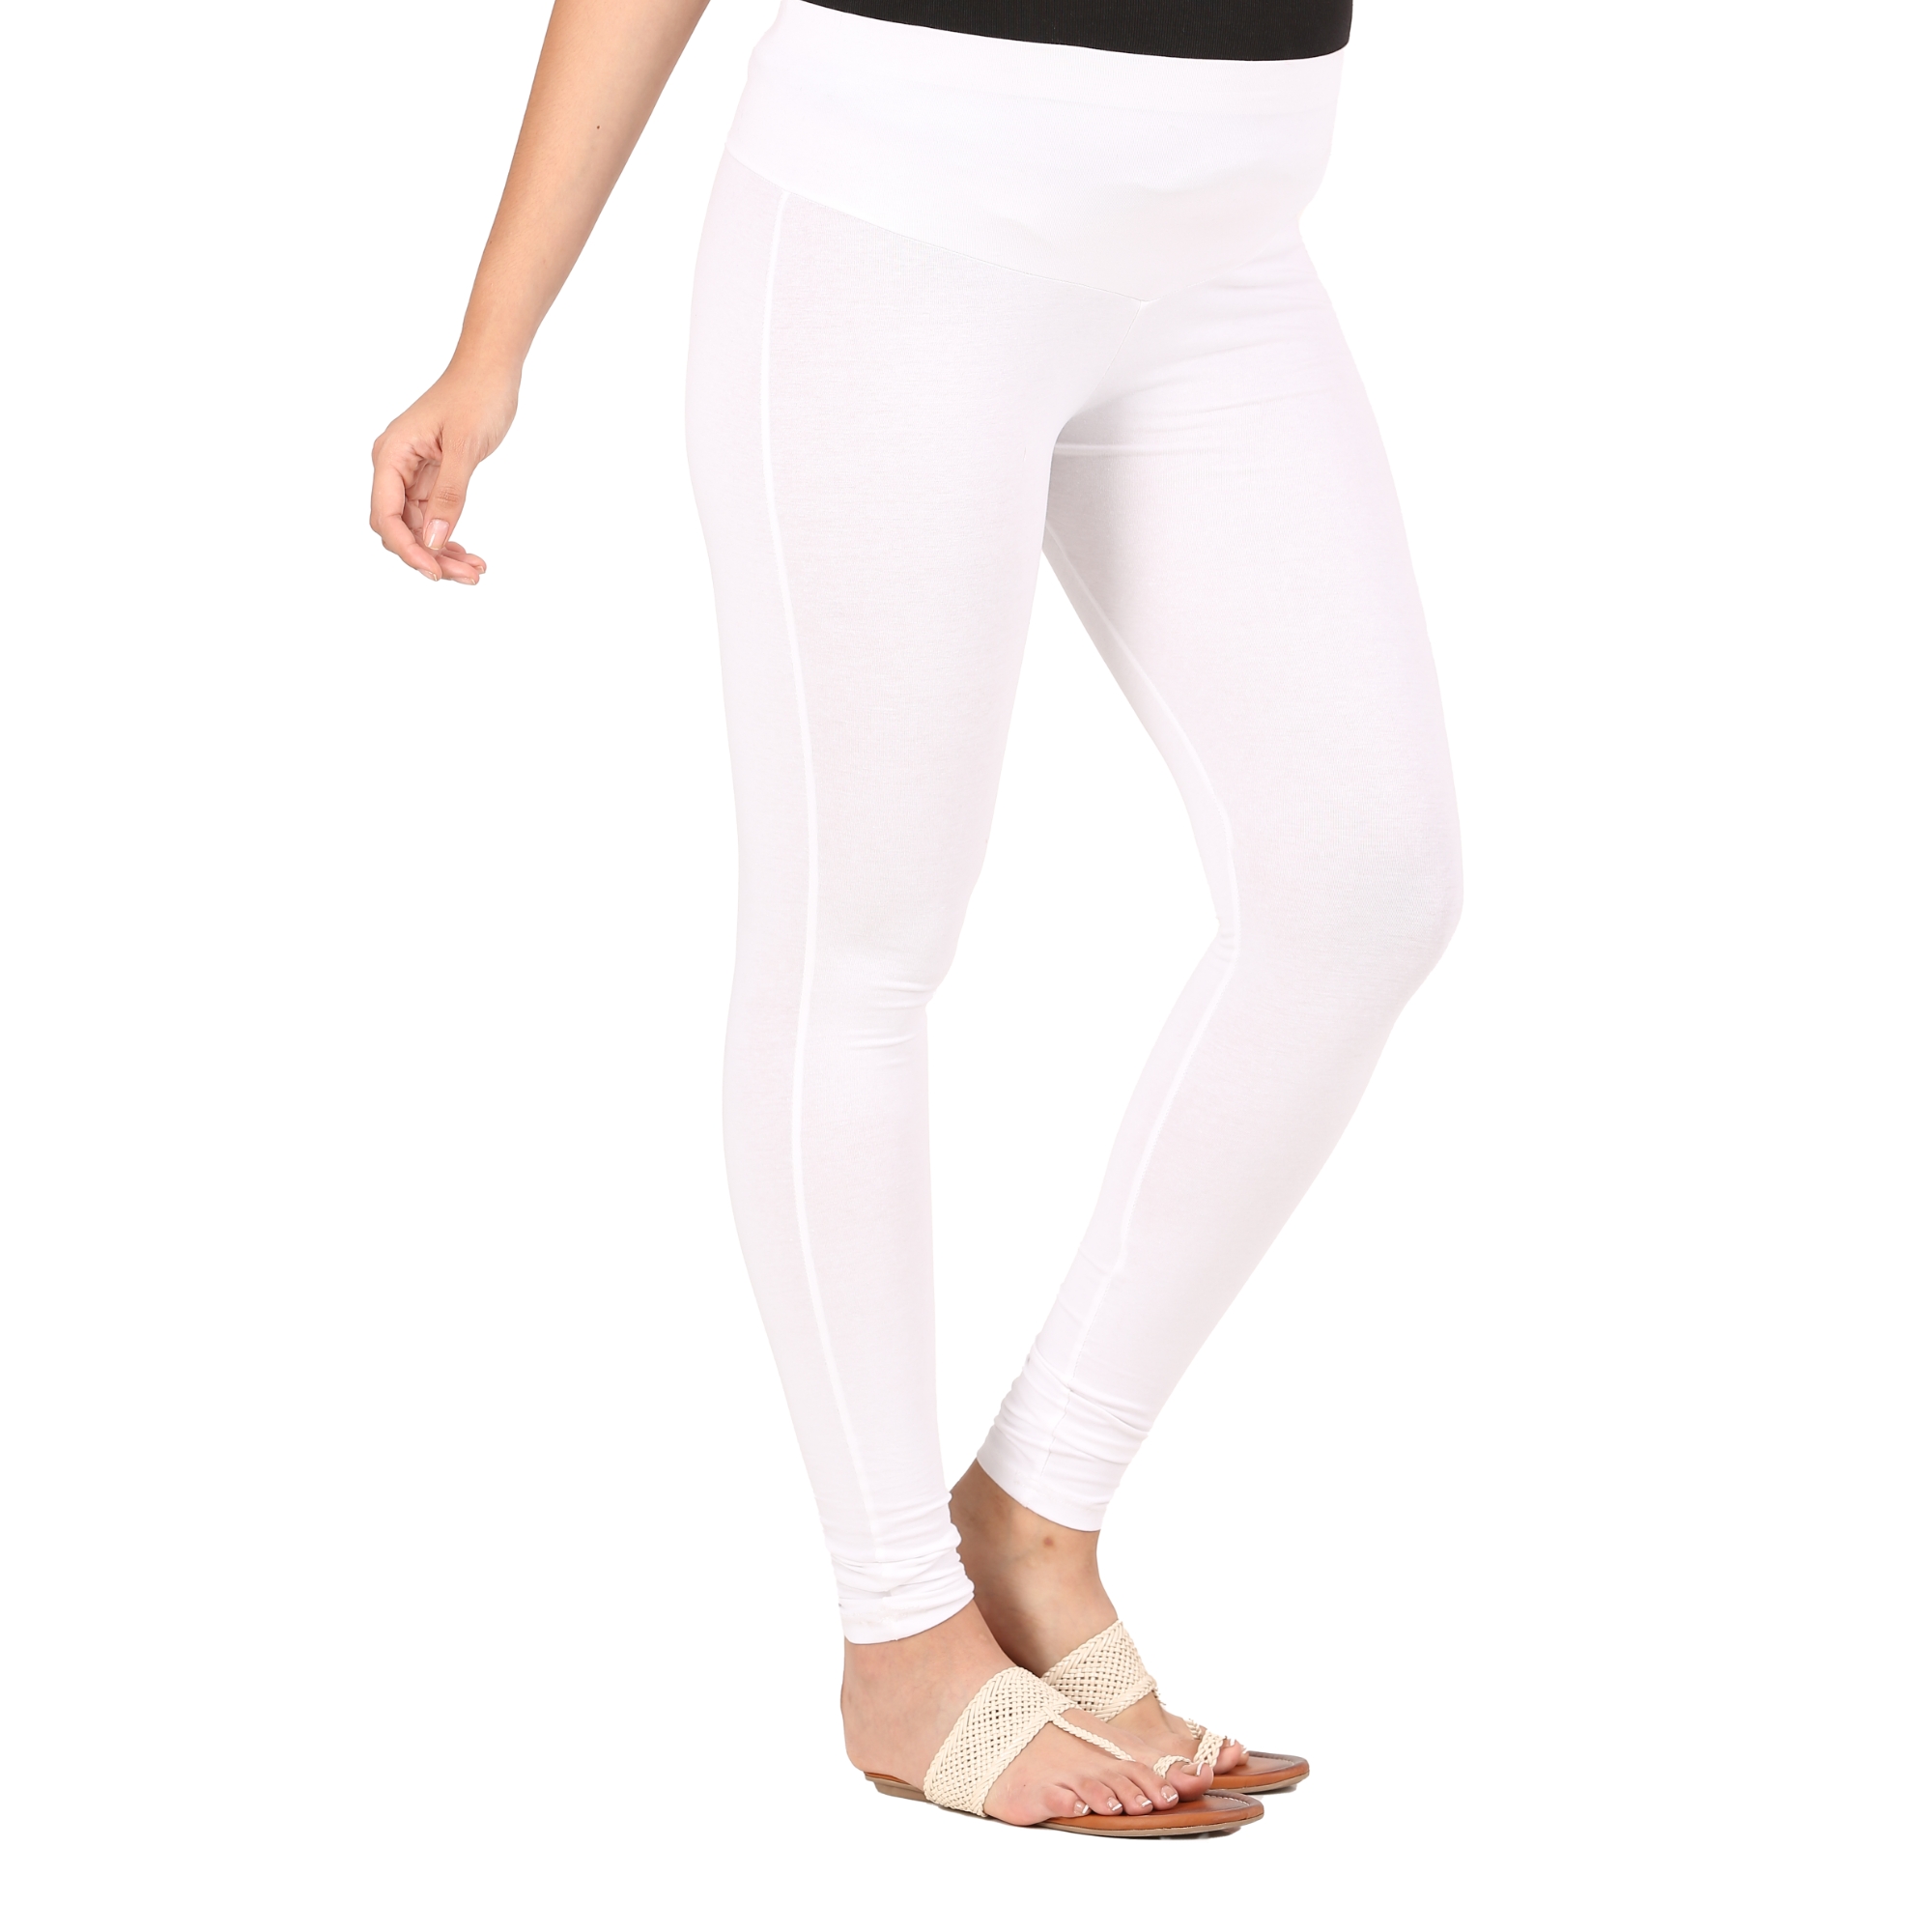 Stretchable Pregnancy & Post Delivery Leggings - White (XXL)